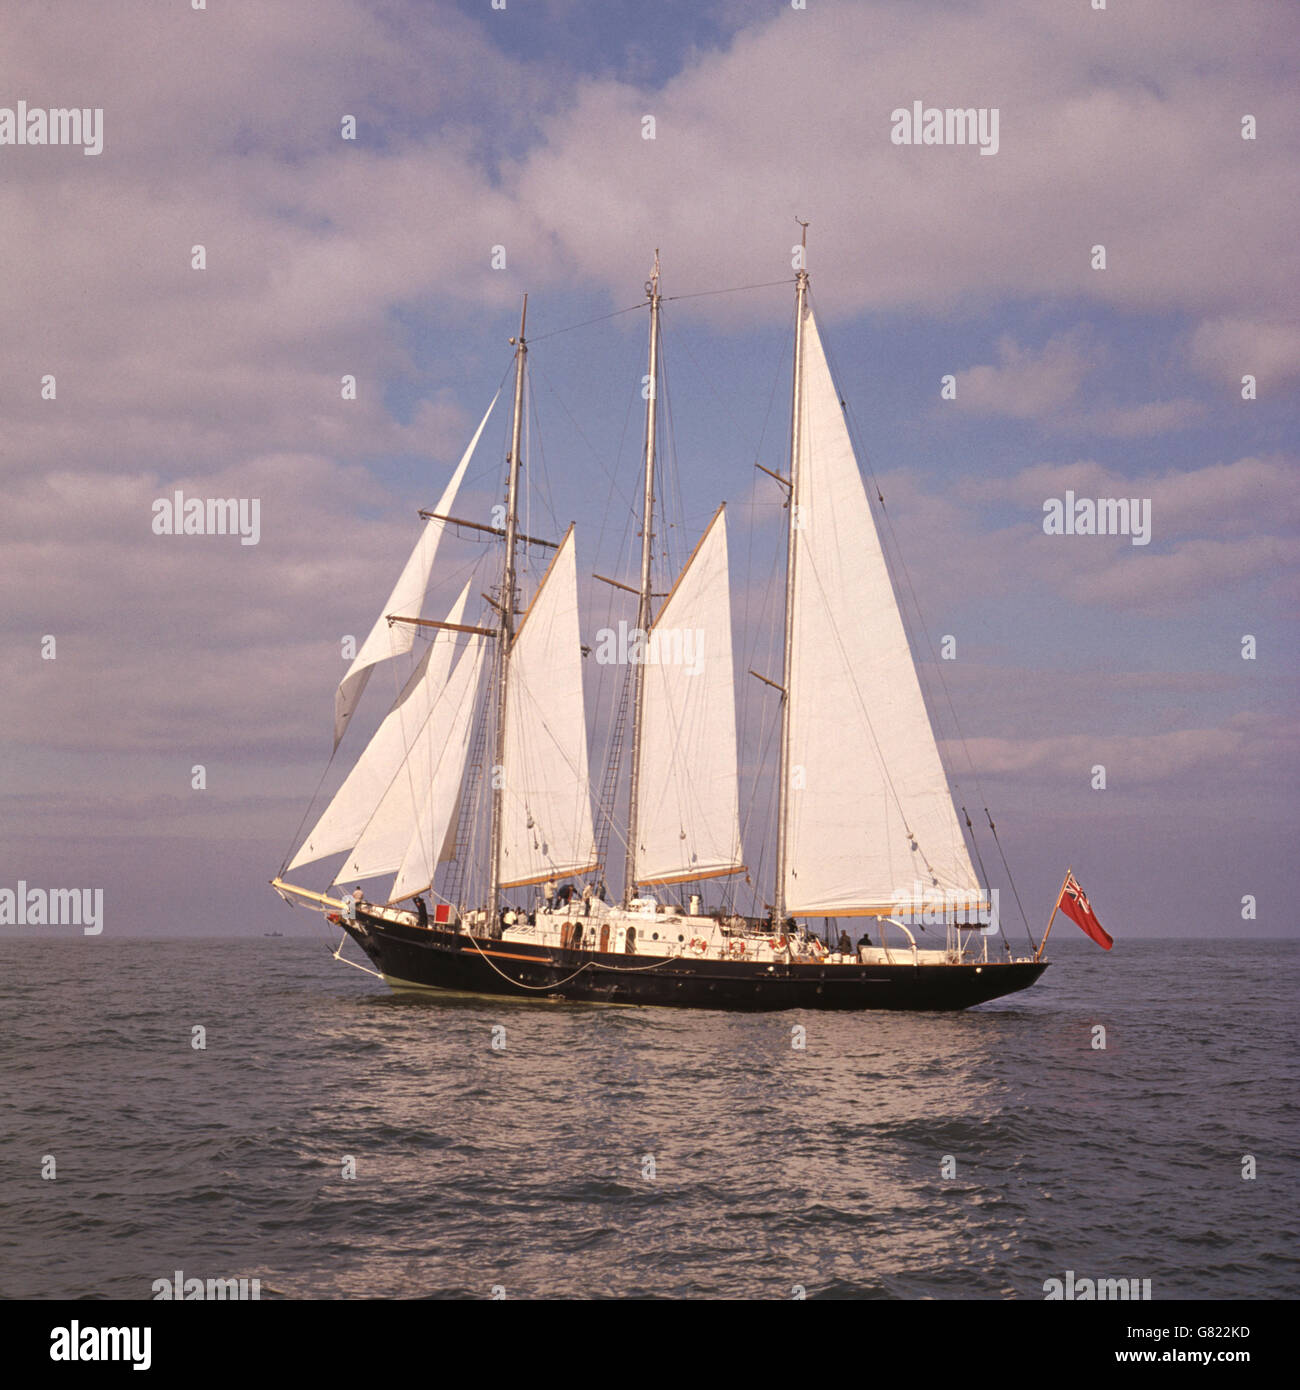 The schooner 'Sir Winston Churchill' during trials in the North Sea off Spurn Point. She is owned by Tall Ships Youth Trust and was built in Hessle, Yorkshire by Richard Dunston Ltd. Stock Photo